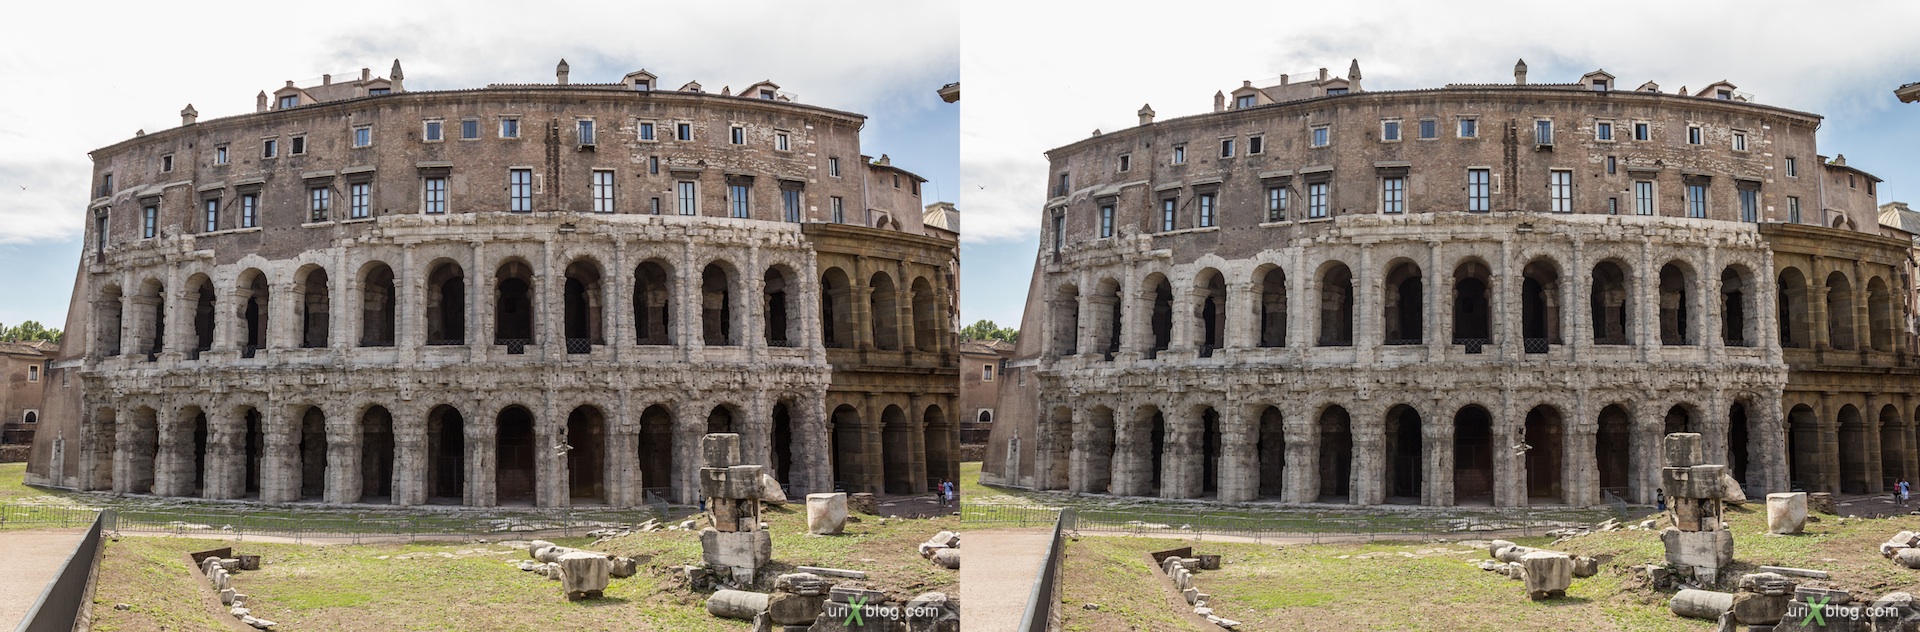 2012, Theater of Marcellus, Rome, Italy, 3D, stereo pair, cross-eyed, crossview, cross view stereo pair